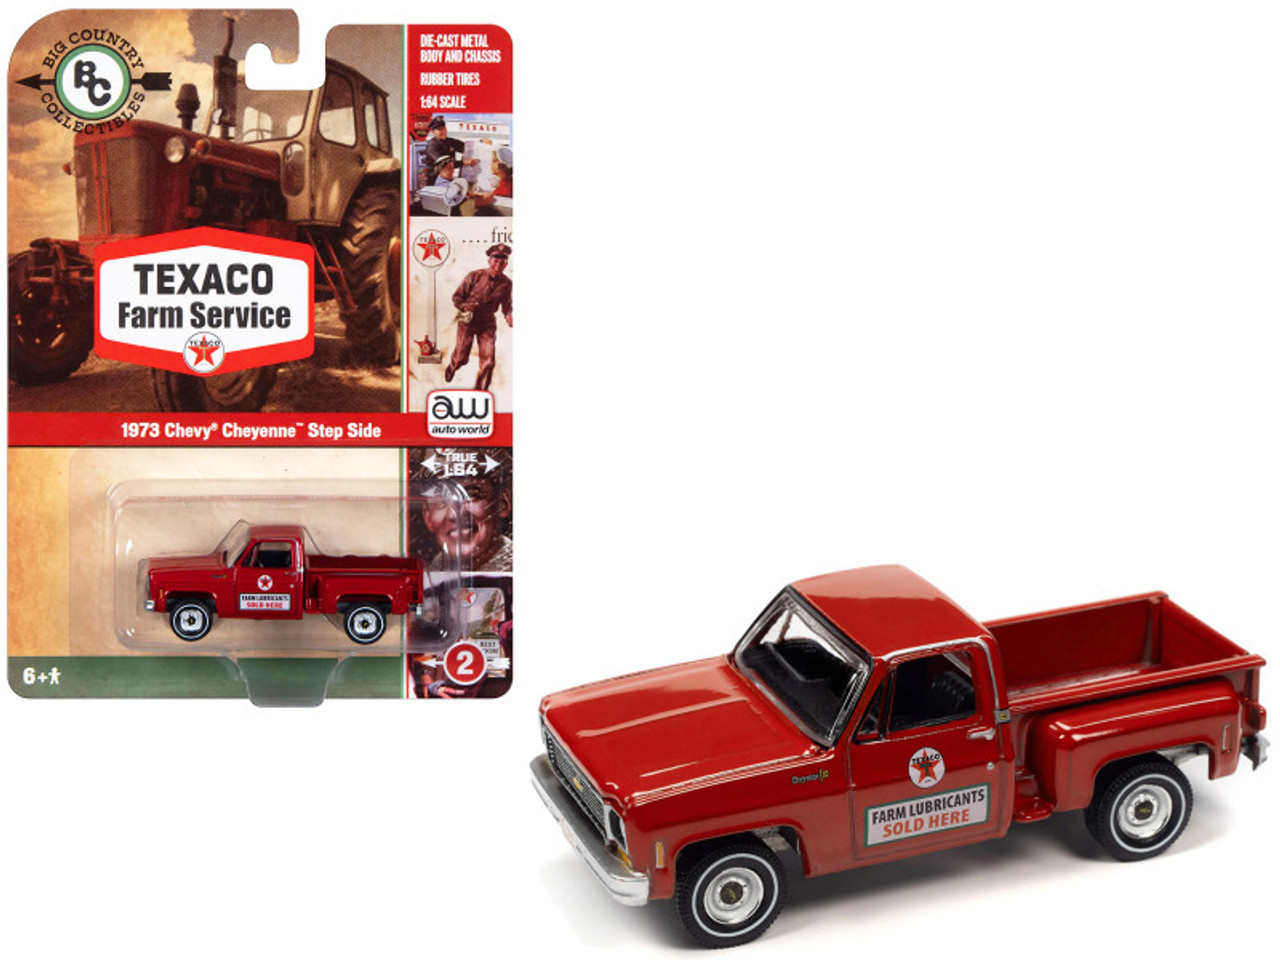 1973 Chevrolet Cheyenne Step Side Pickup Truck Red "Texaco Farm Service" "Big Country Collectibles" 2023 Release 1 1/64 Diecast Model Car by Auto World